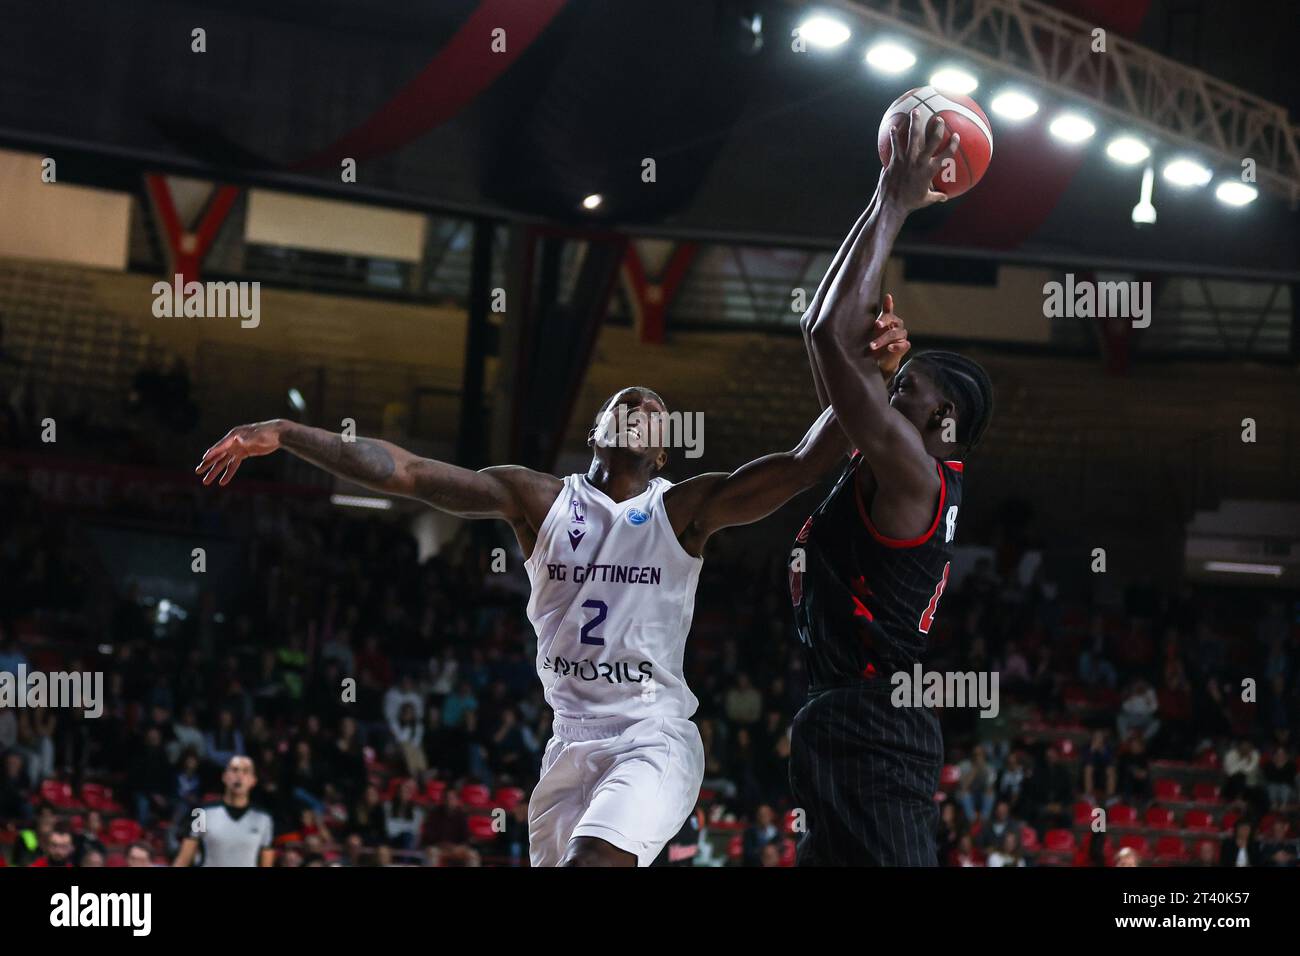 Varese, Italy. 25th Oct, 2023. Gabe Brown #44 of Itelyum Varese (R) competes for the ball against Umoja Gibson #2 of BG Gottingen (L) during FIBA Europe Cup 2023/24 Regular Season Group I game between Itelyum Varese and BG Gottingen at Itelyum Arena, Varese, Italy on October 25, 2023 Credit: Independent Photo Agency/Alamy Live News Stock Photo